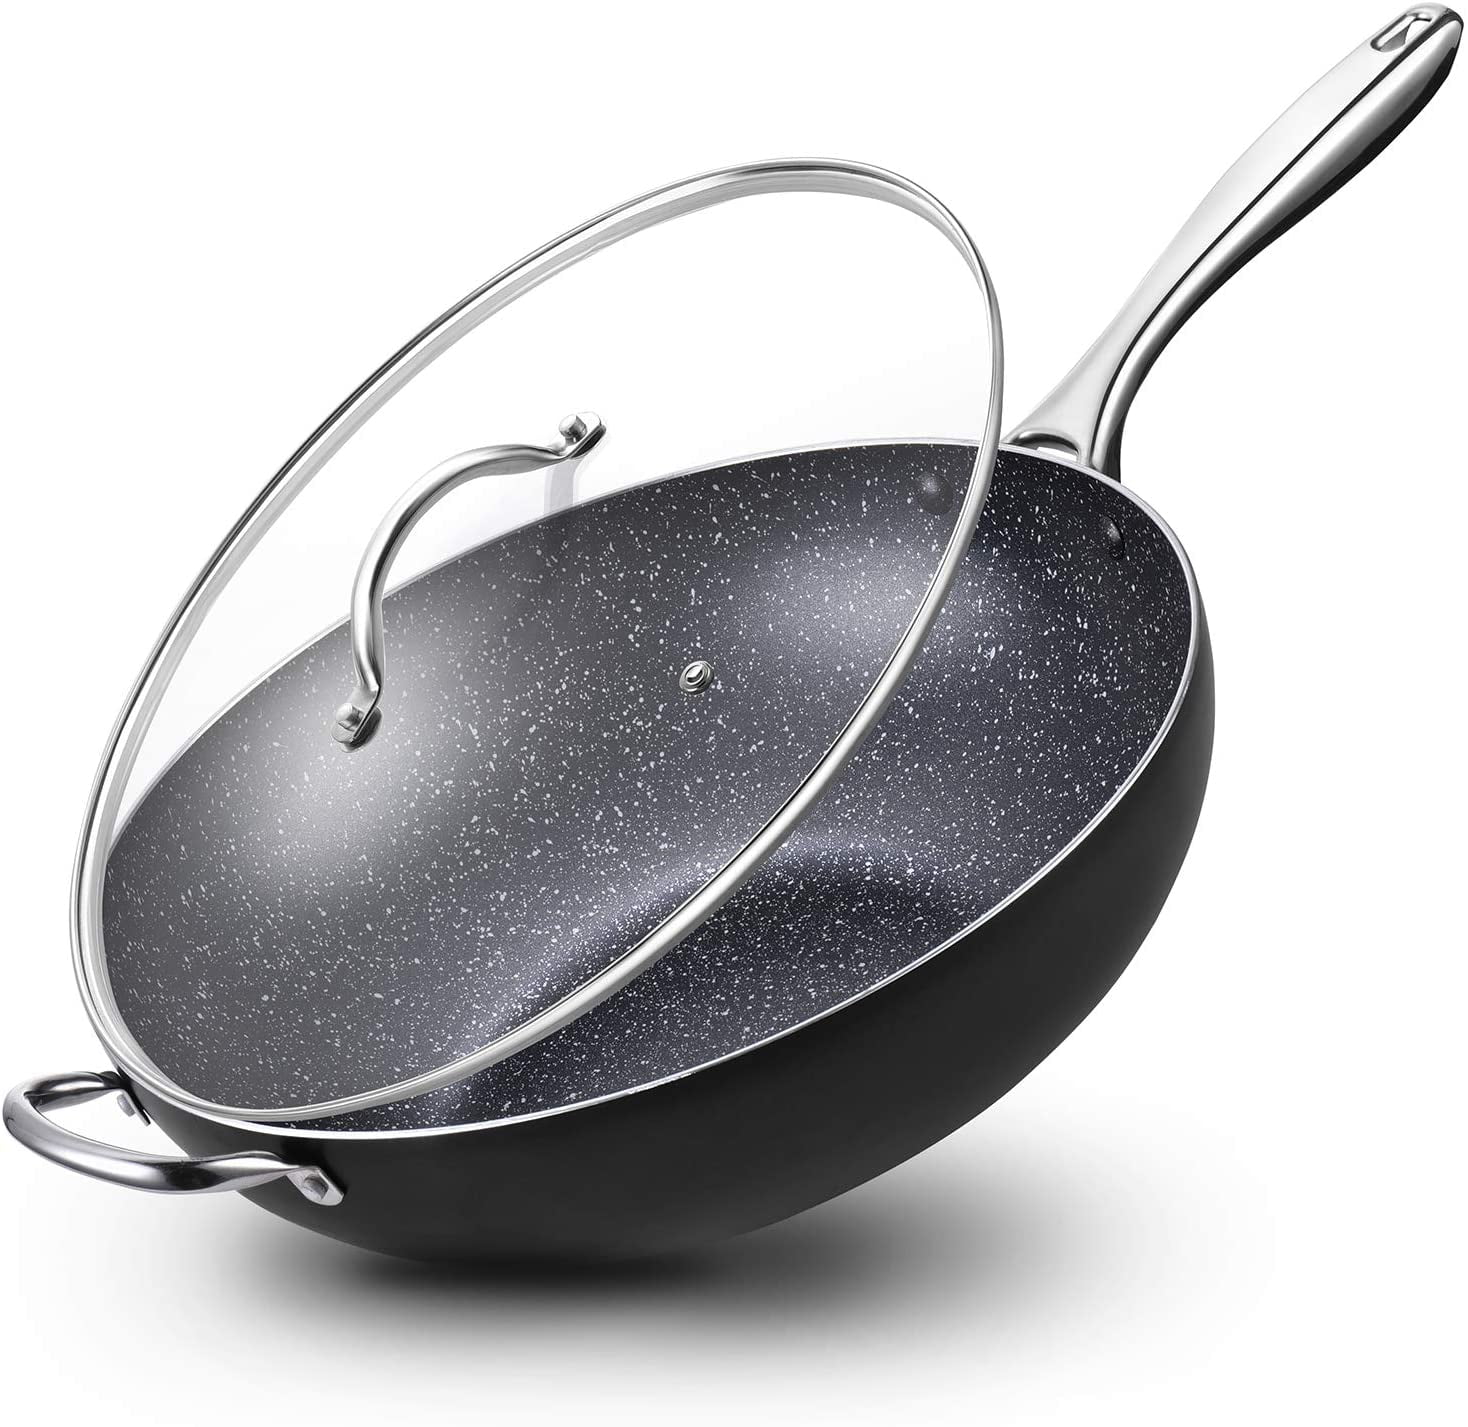 14" Wok Pan- CSK Fry Pan with Lid, Large Family Sized Skillet with